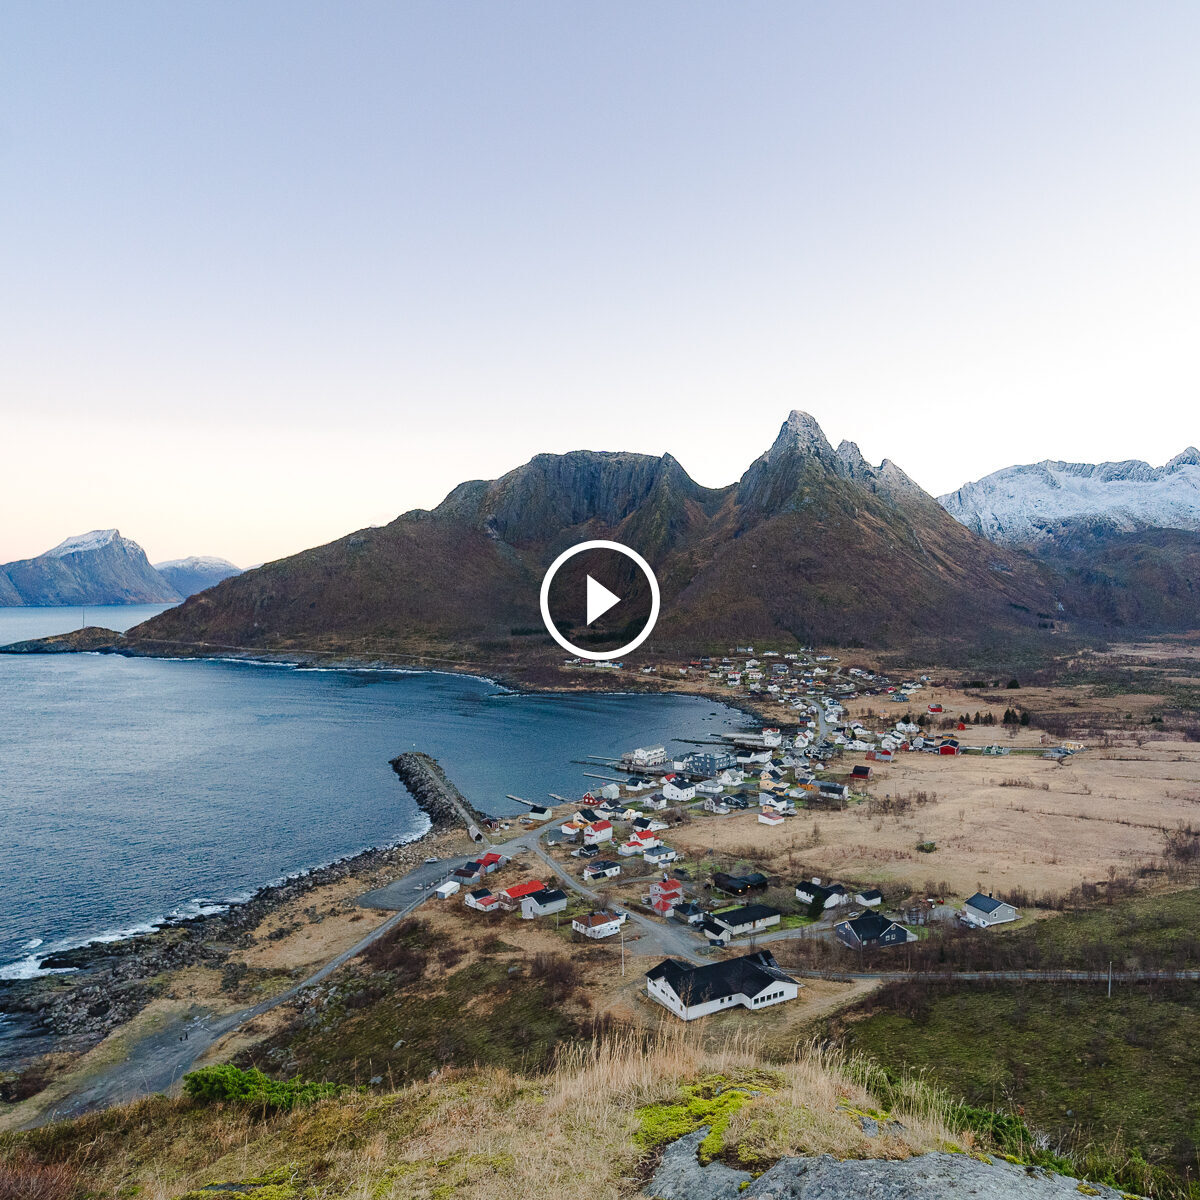 Rewrite this title 9 Best Senja Hikes Norway Title should